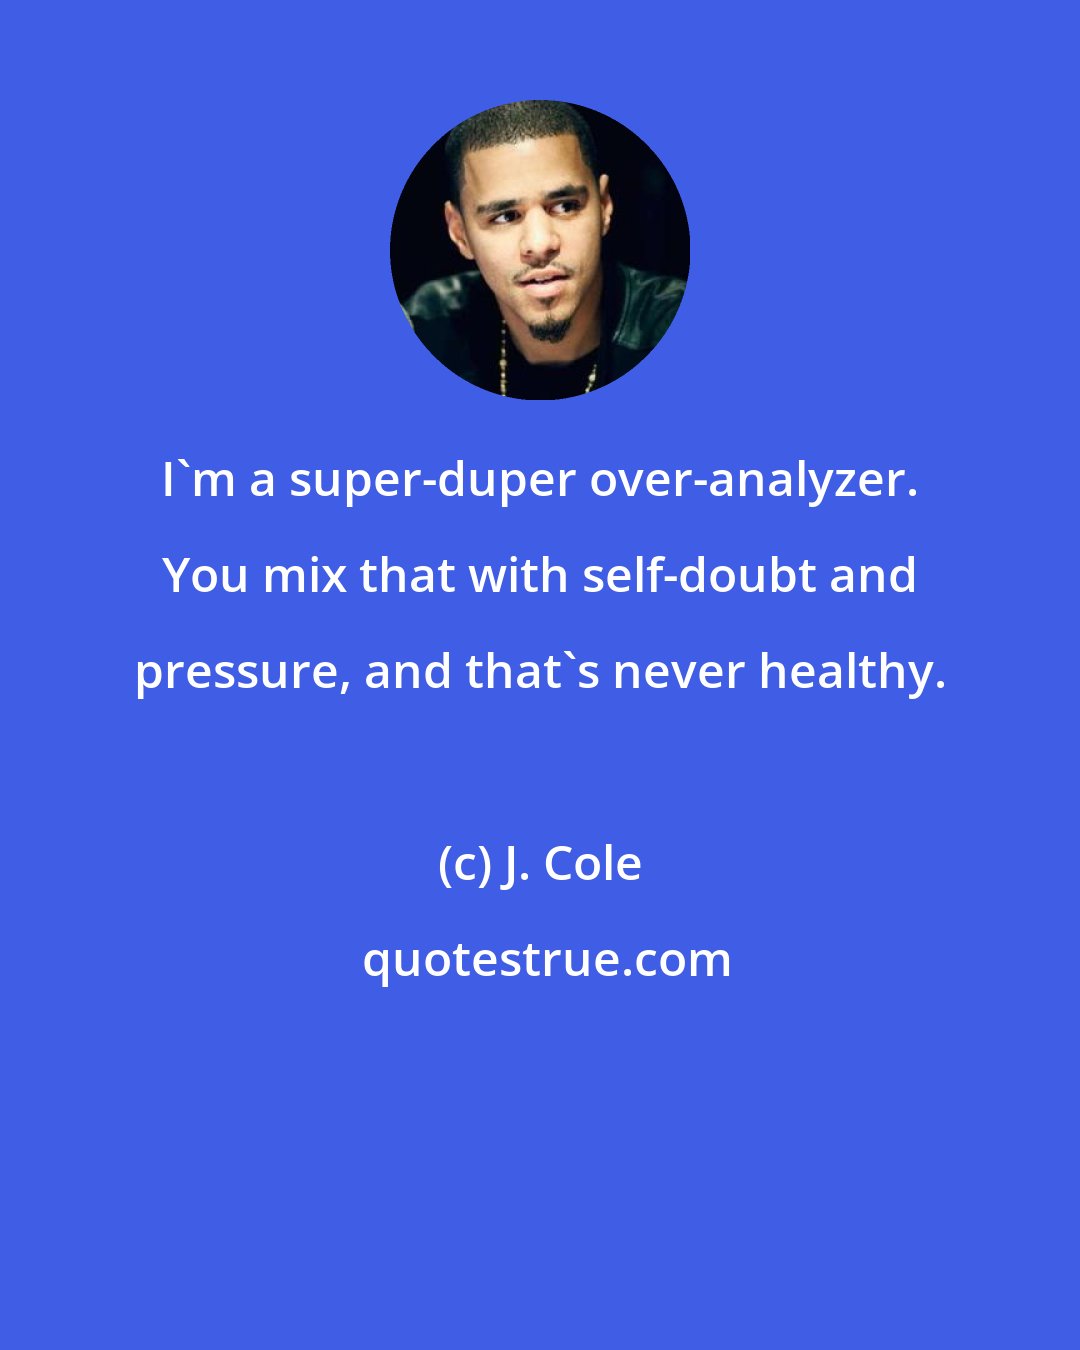 J. Cole: I'm a super-duper over-analyzer. You mix that with self-doubt and pressure, and that's never healthy.